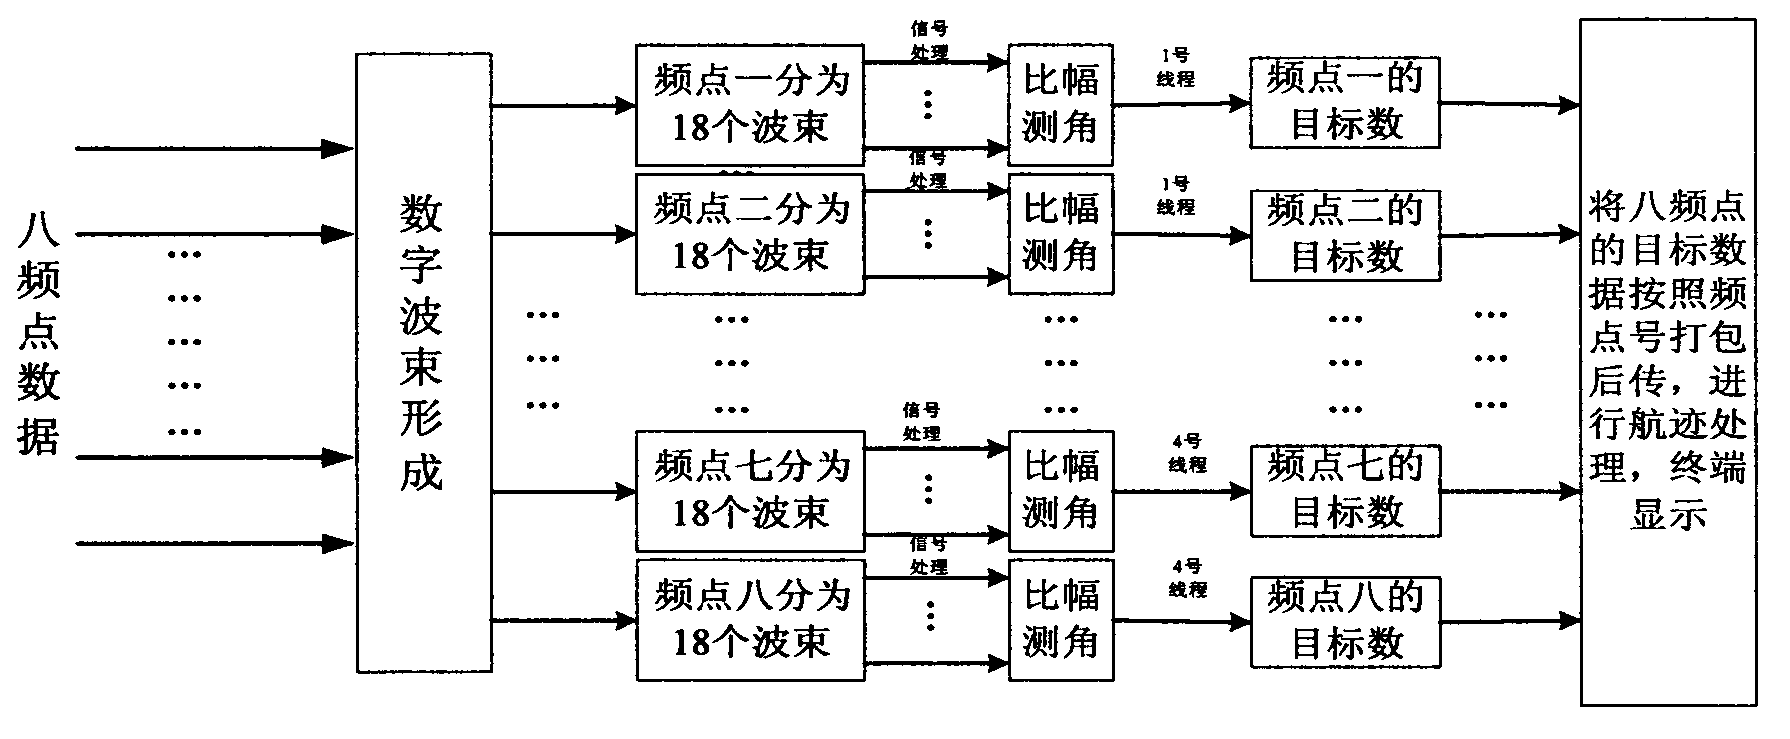 CPU (Central Processing Unit) realizing method based on amplitude-comparison direction finding of multi-frequency point omnibearing passive radar